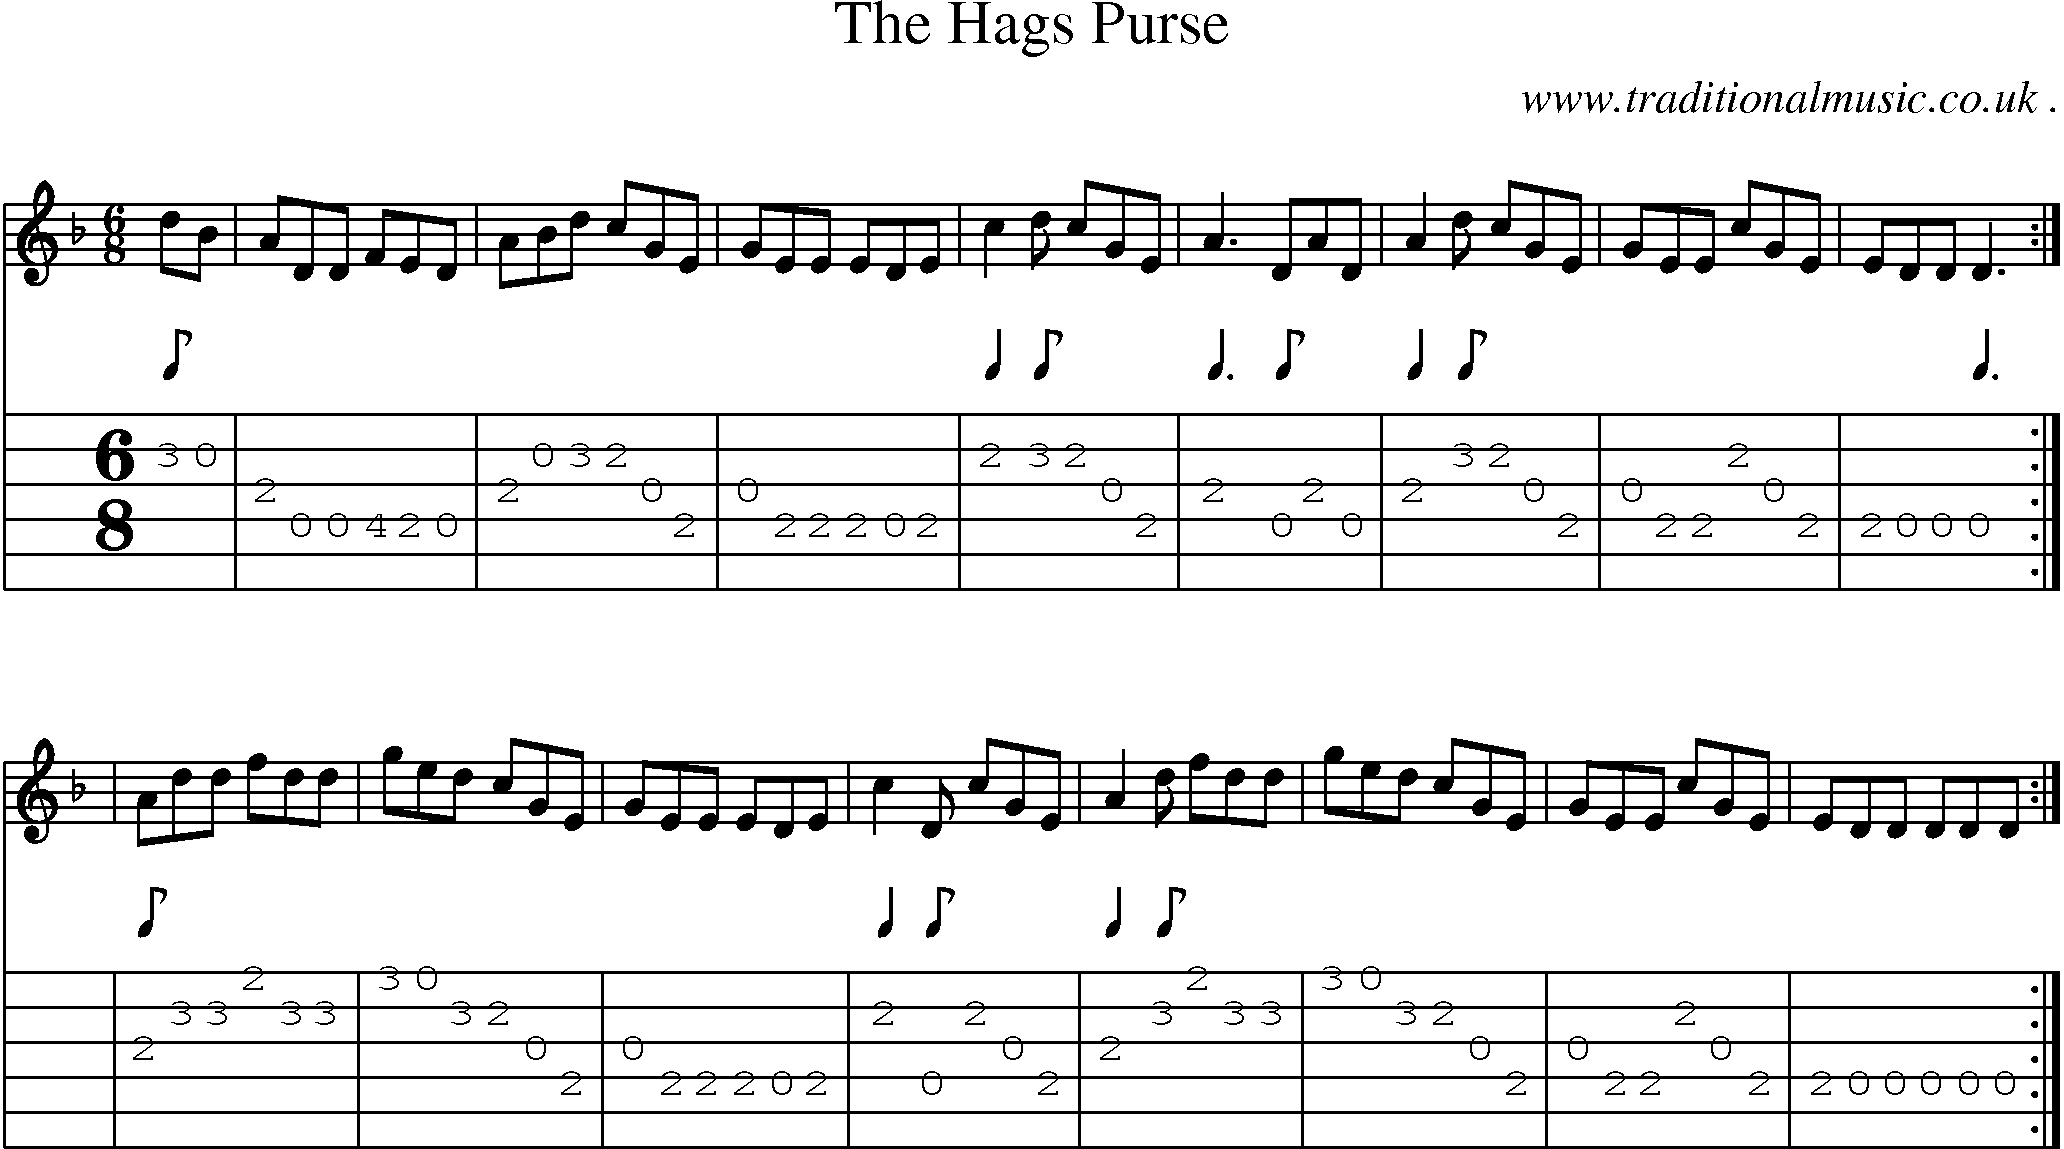 Sheet-Music and Guitar Tabs for The Hags Purse